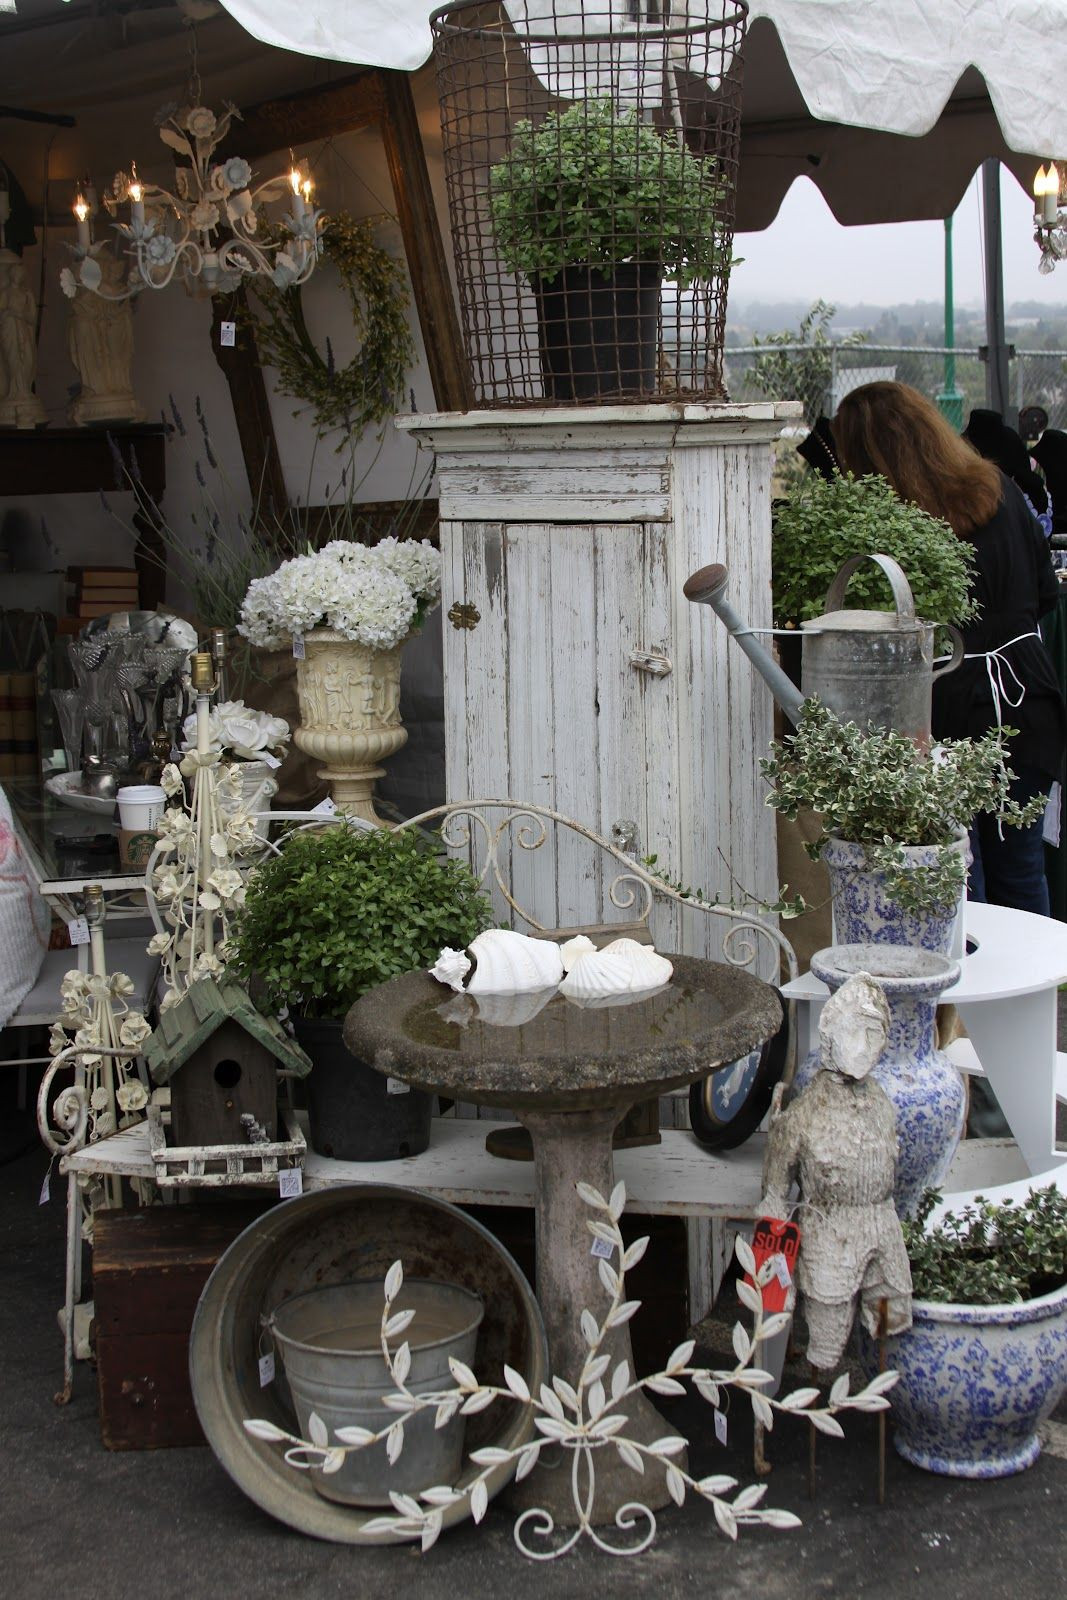 Spring Ideas For Resale Booths
 Pin by Nicole Merkle on Flea Market Setup